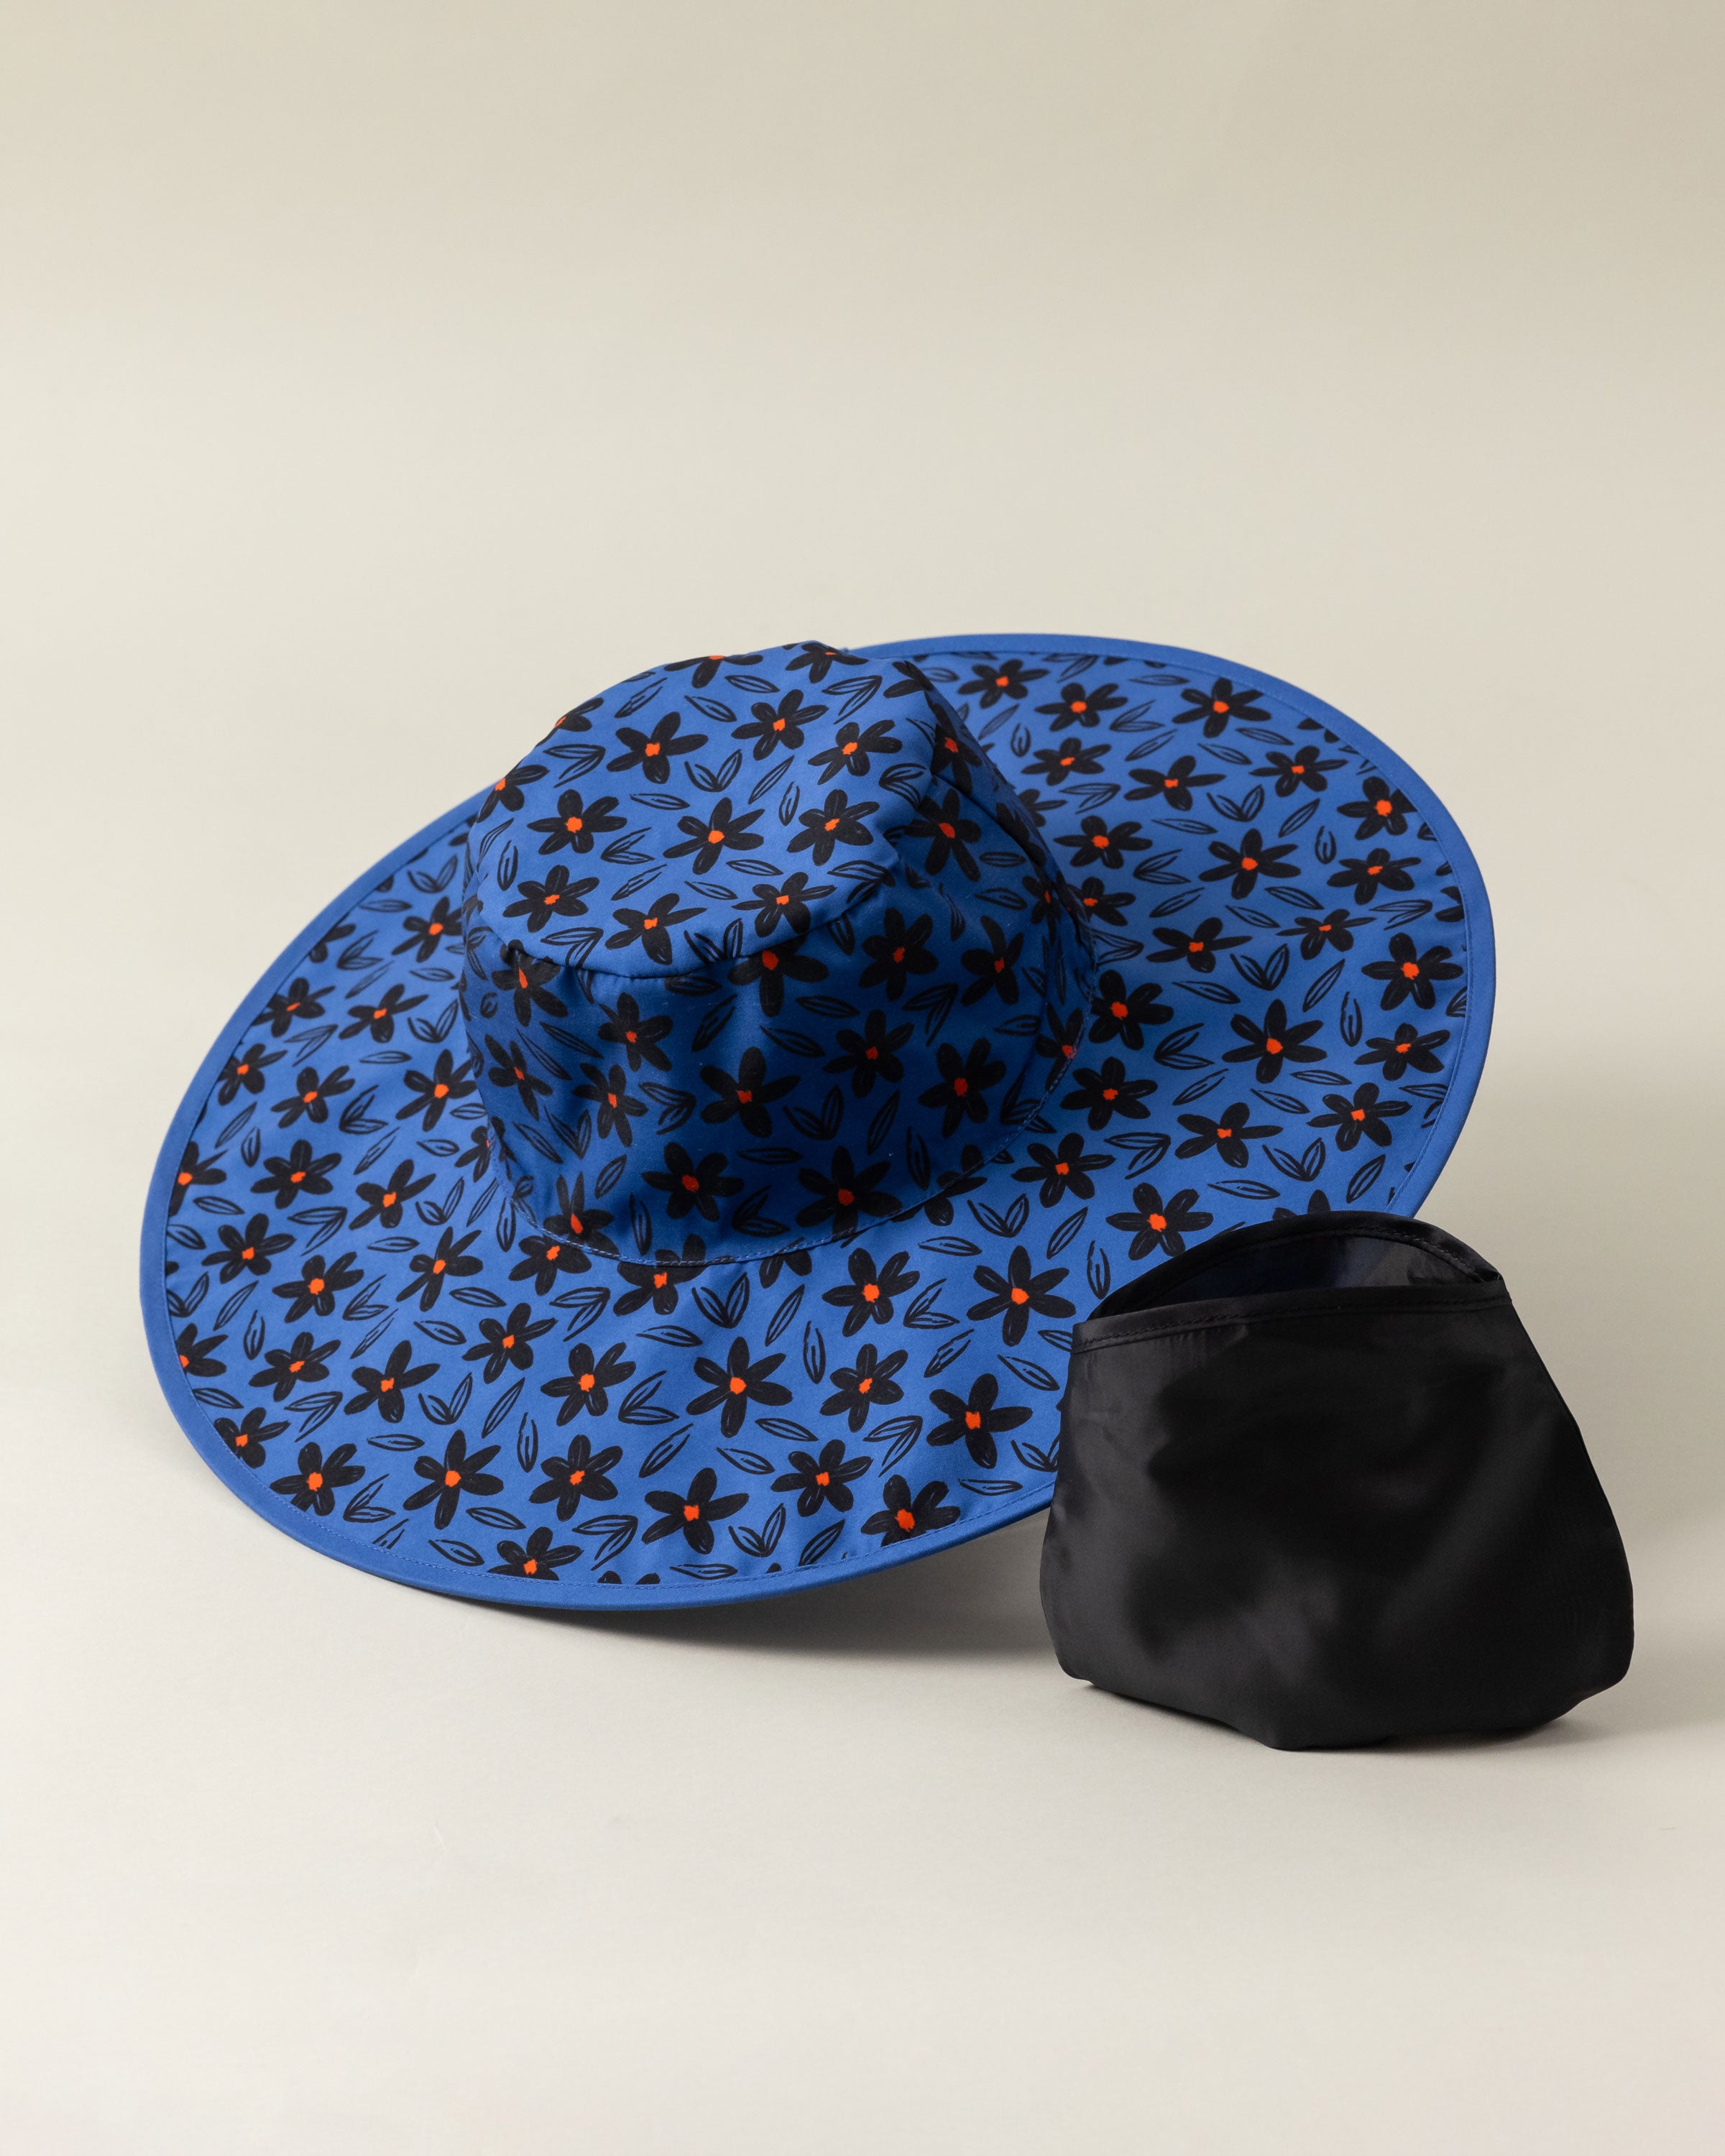 Satin Lined Foldable Sun Hat in Floral